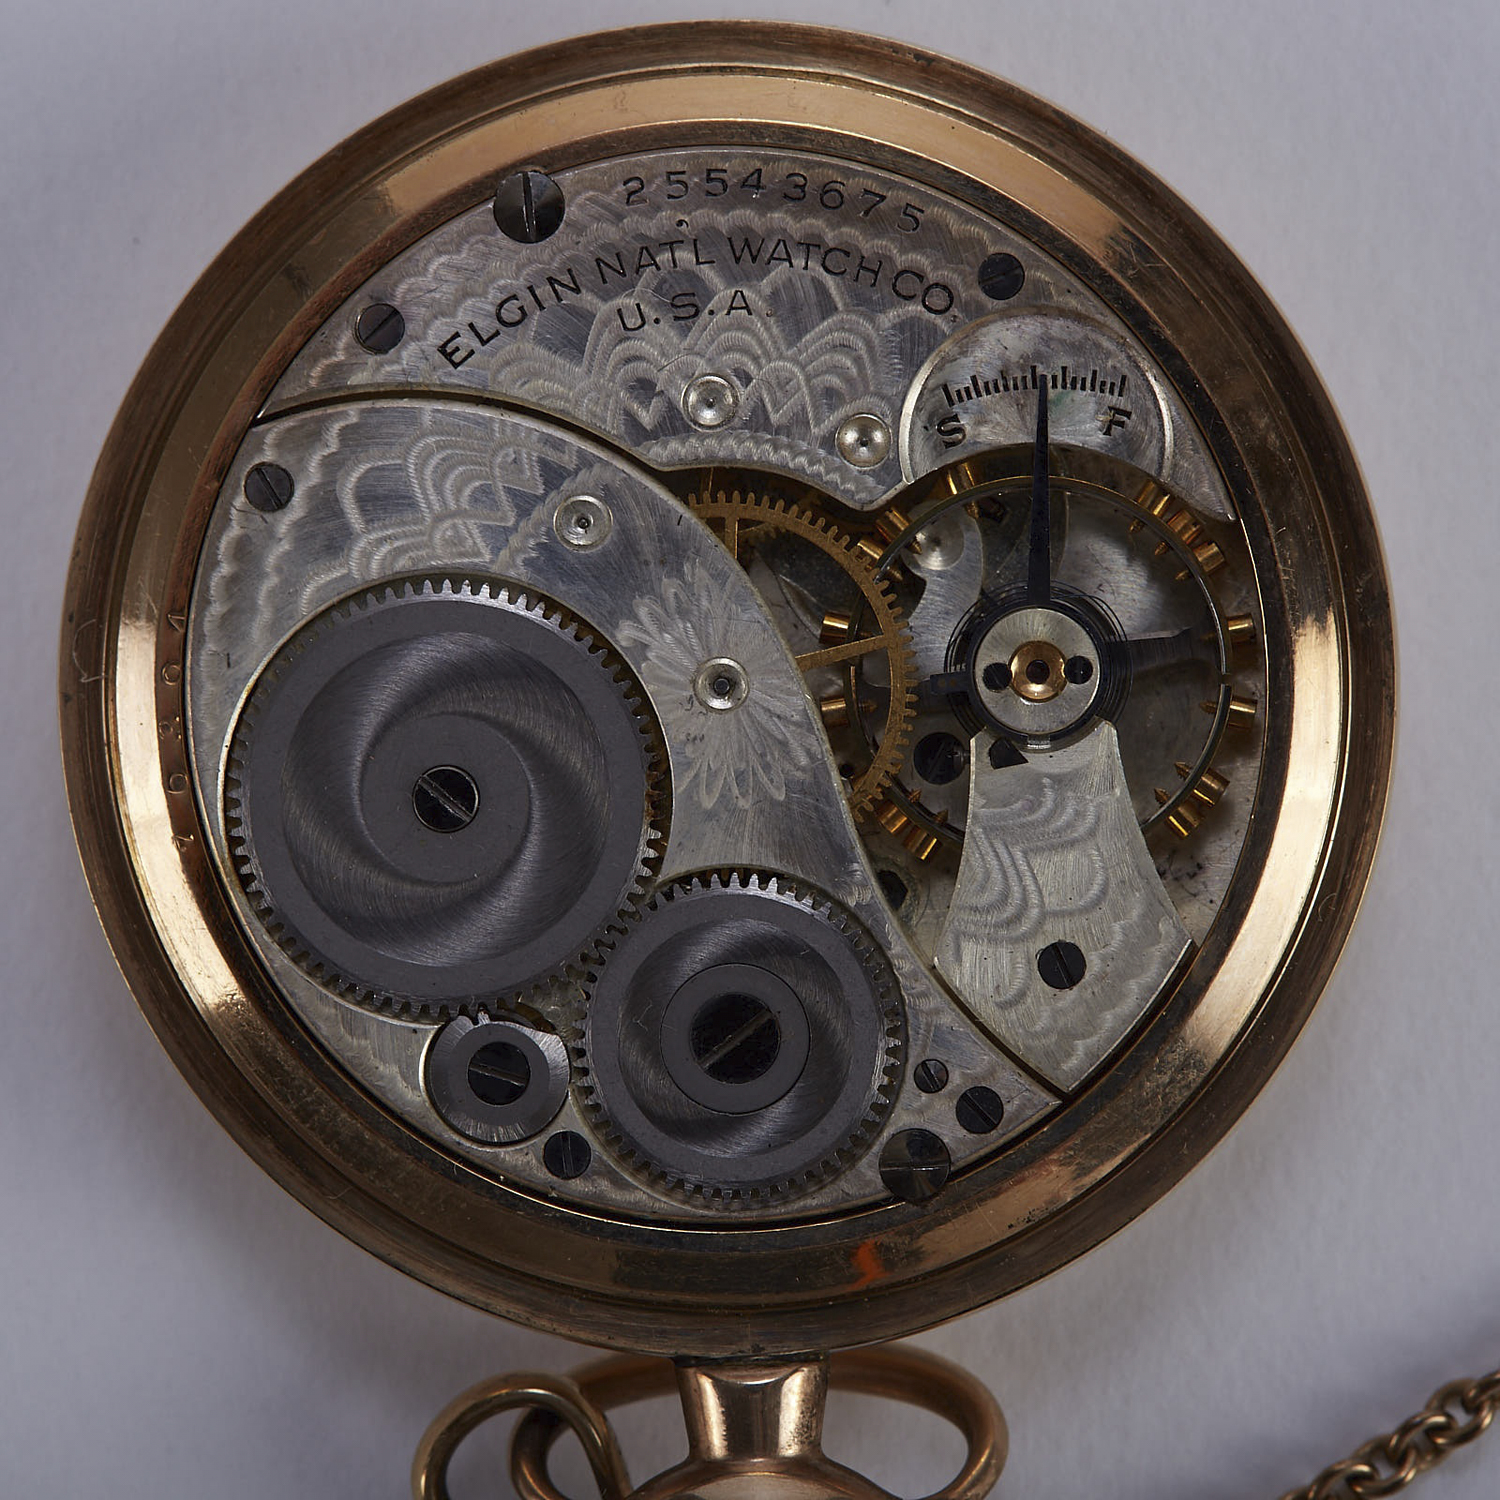 Elgin Gold Filled Pocket Watch w/ Chain - Image 4 of 6